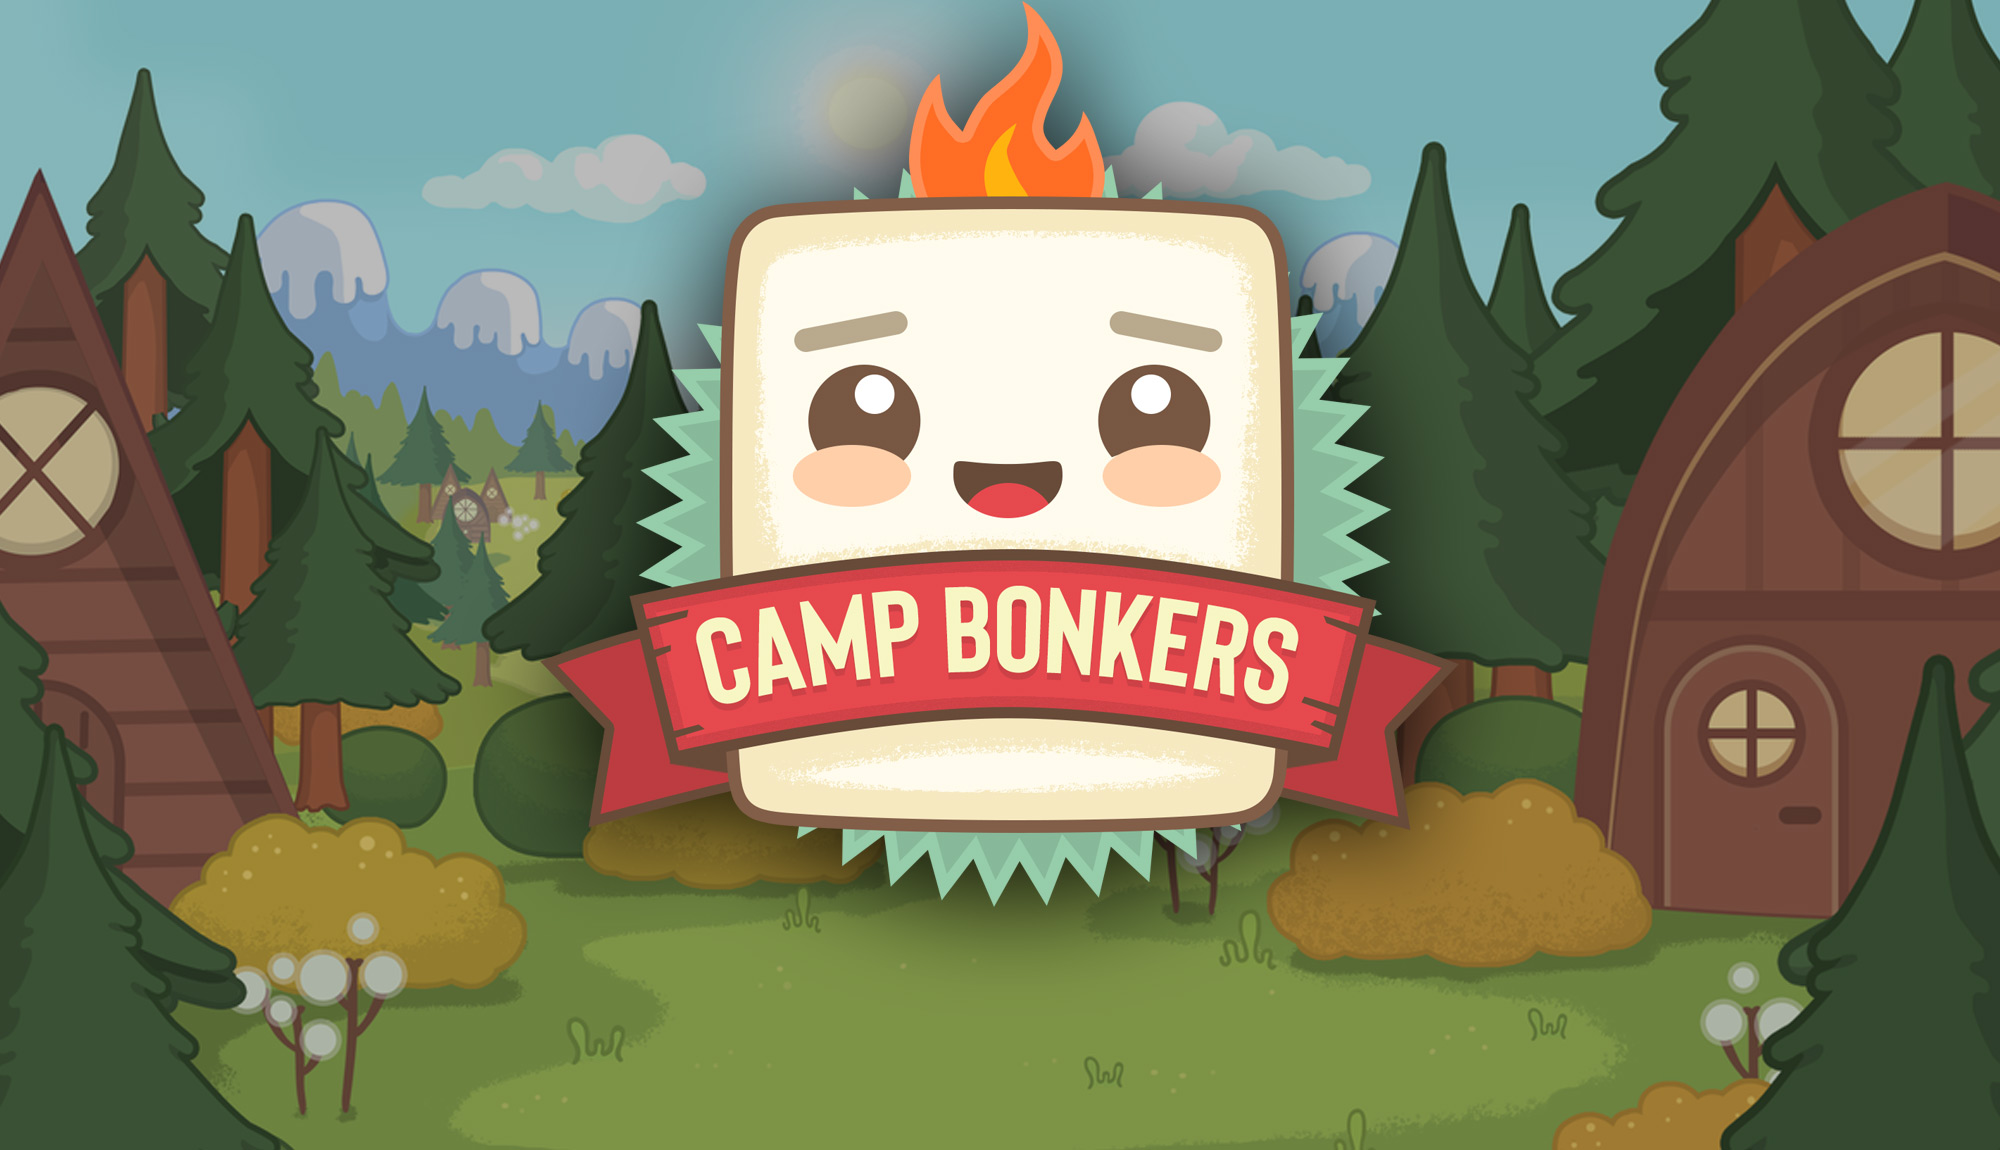 CAMP BONKERS is Here!